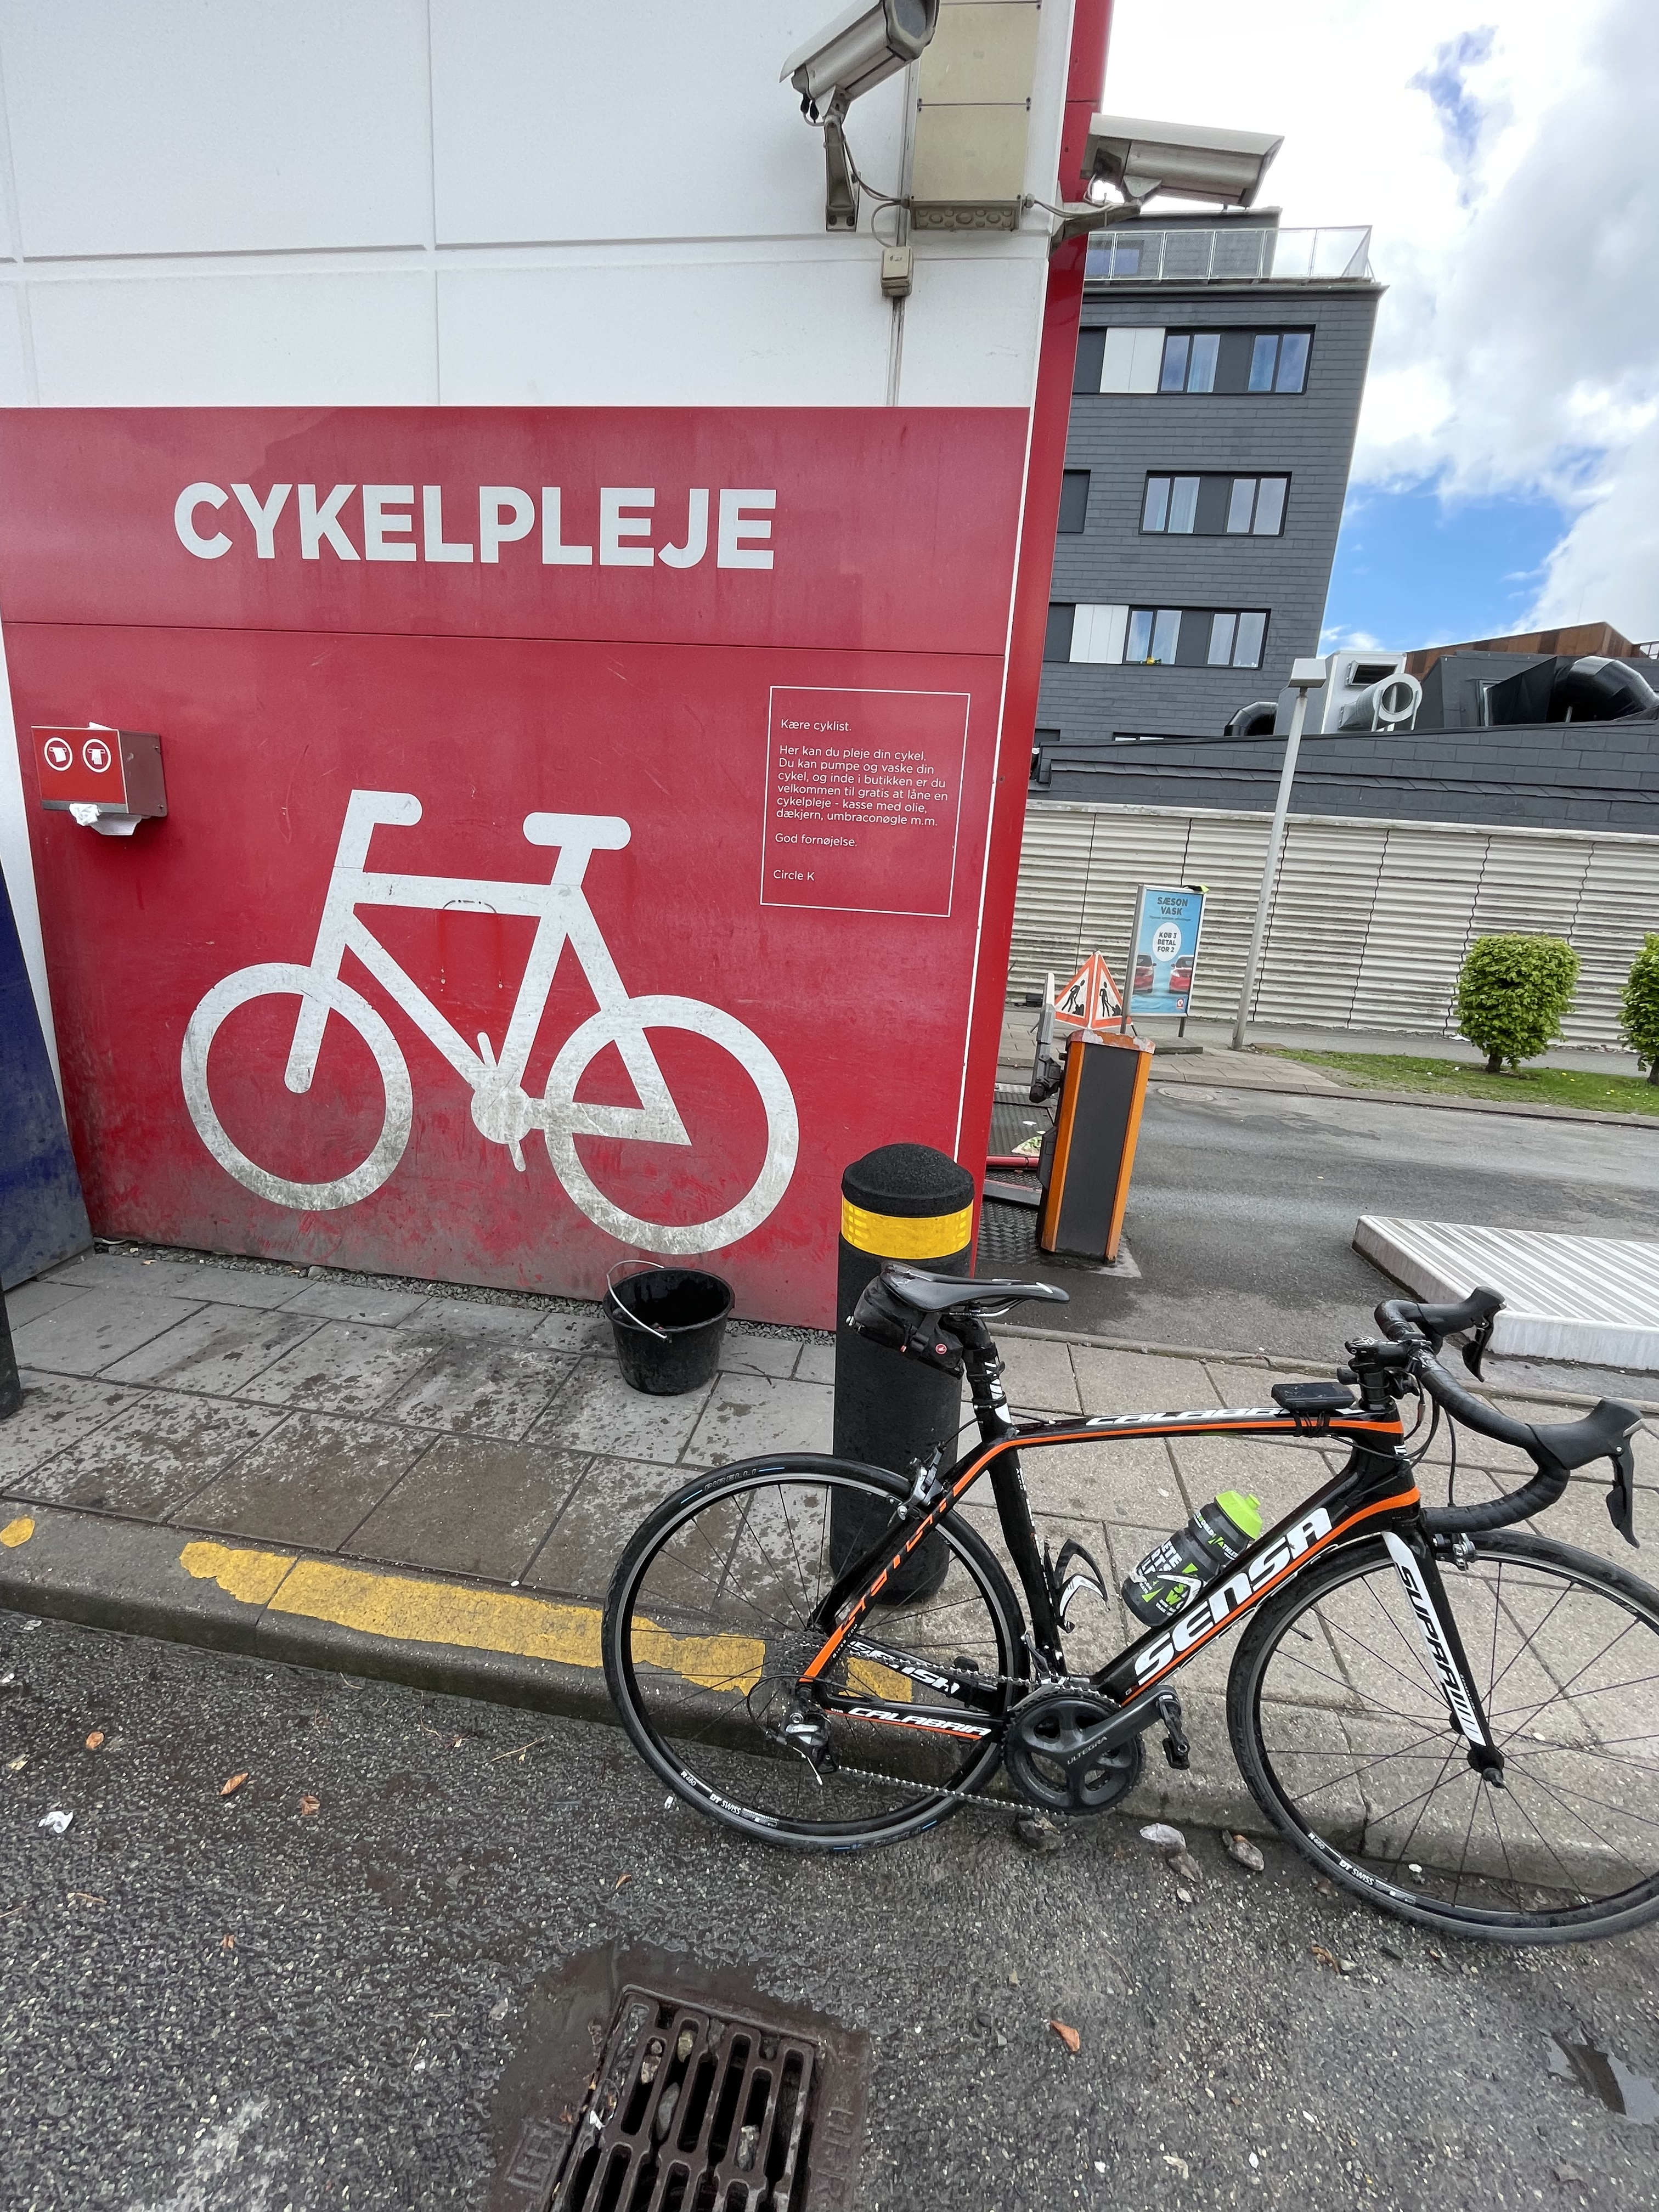 Adrián Moreno Peña on "I'll share some randomly pics in that show some smaller differences between the two cycling cultures. In Copenhagen there's a traffic light upfront, across the